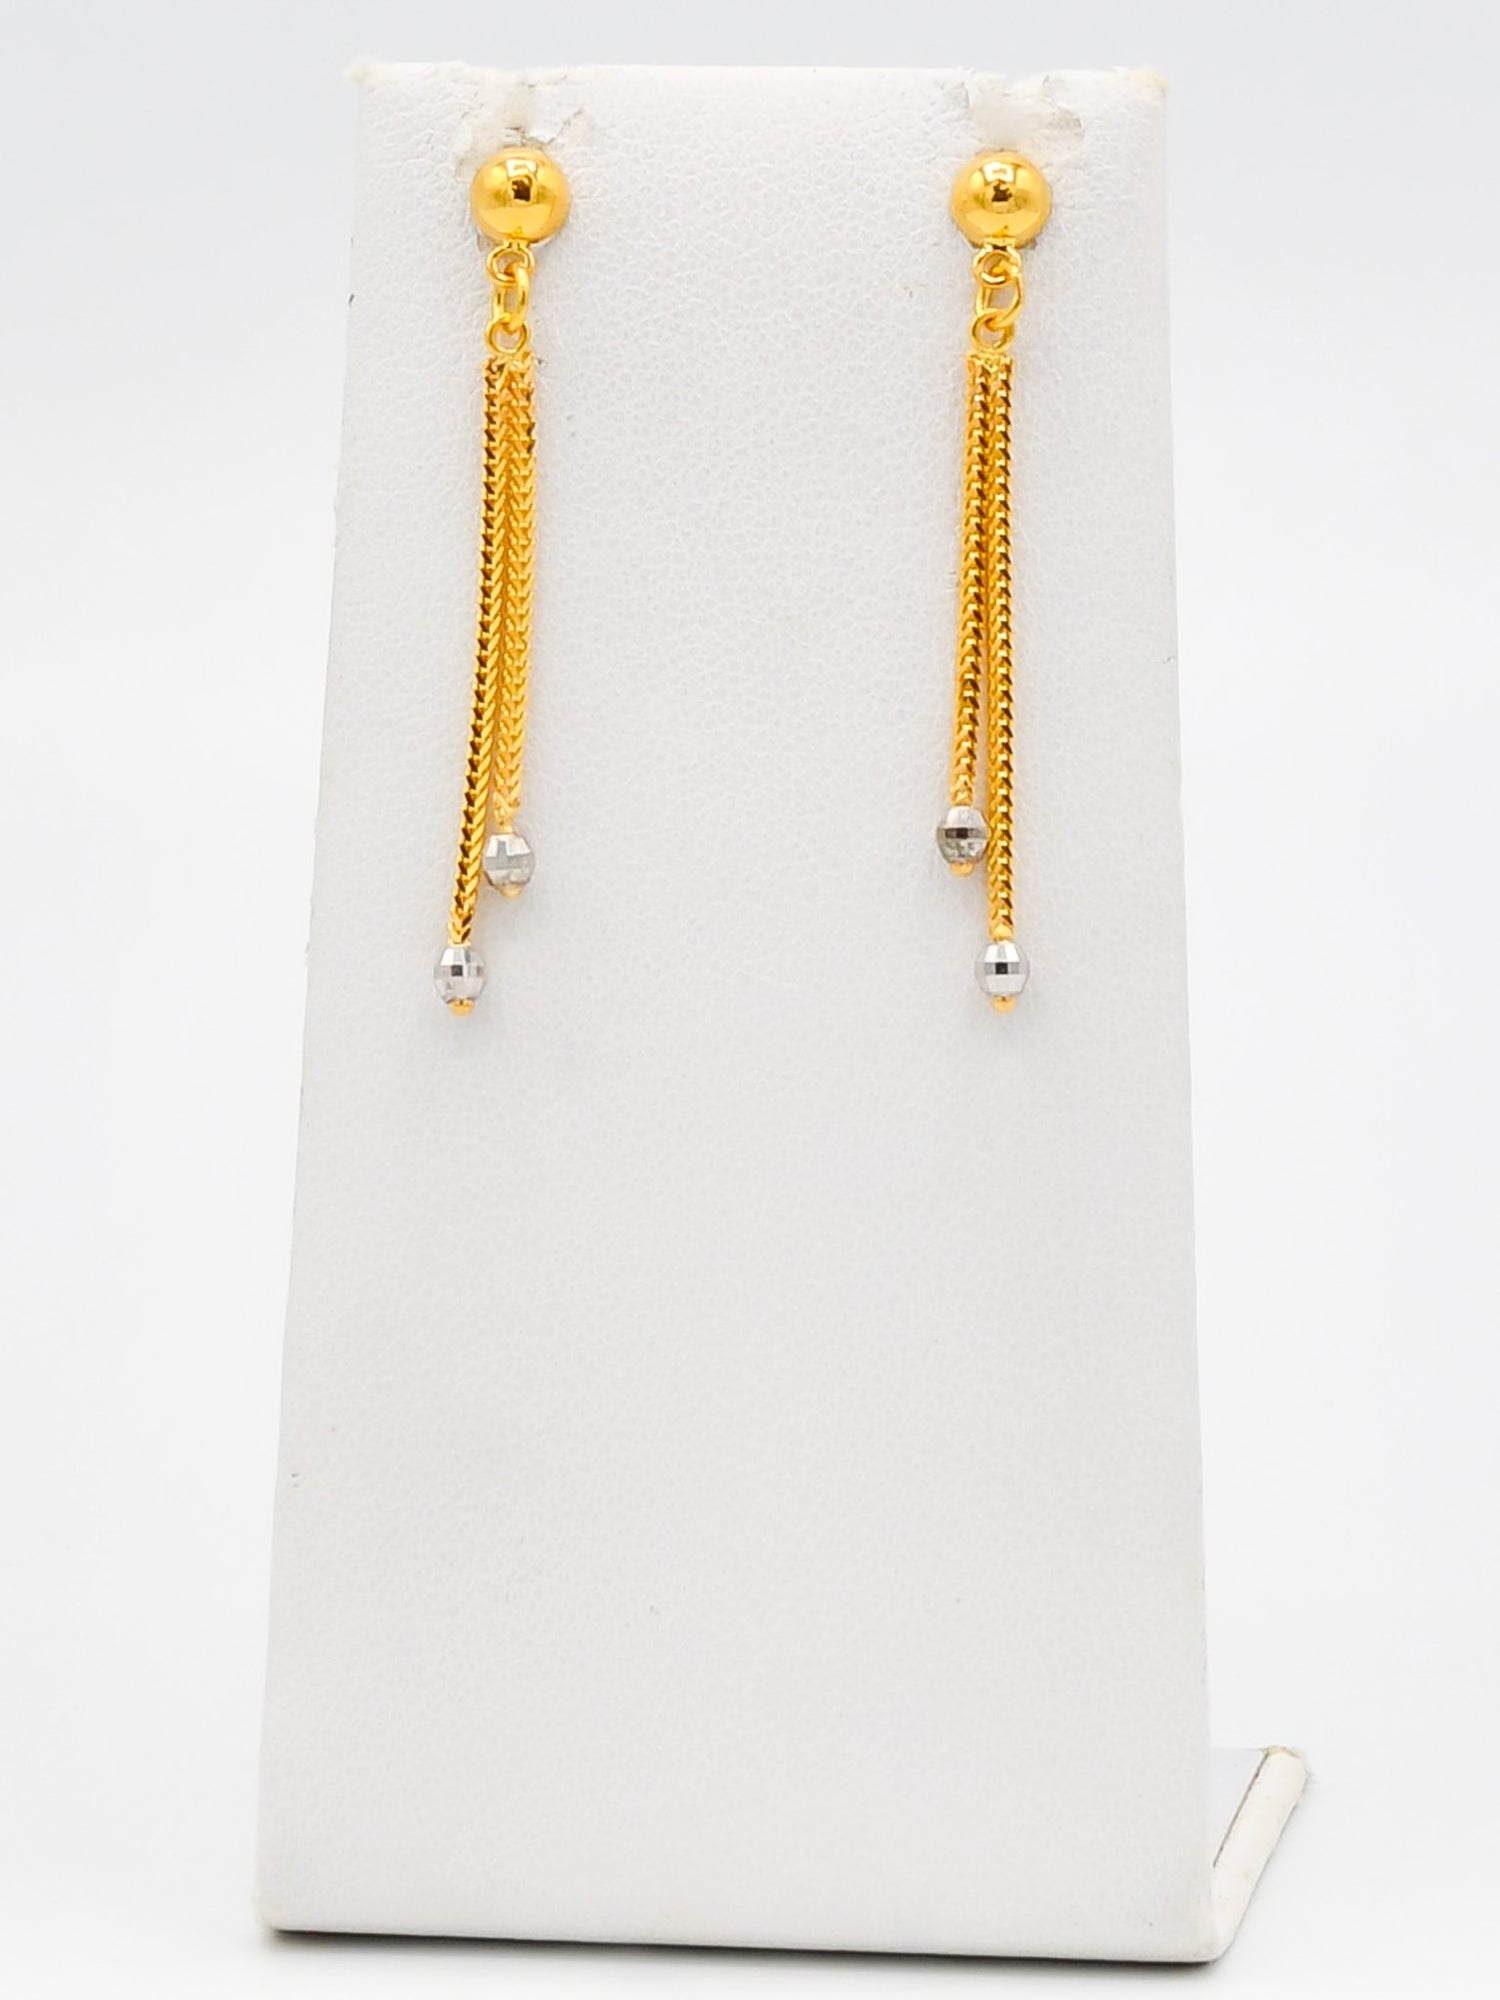 22ct Gold Two Tone Dolphine Necklace Set - Roop Darshan